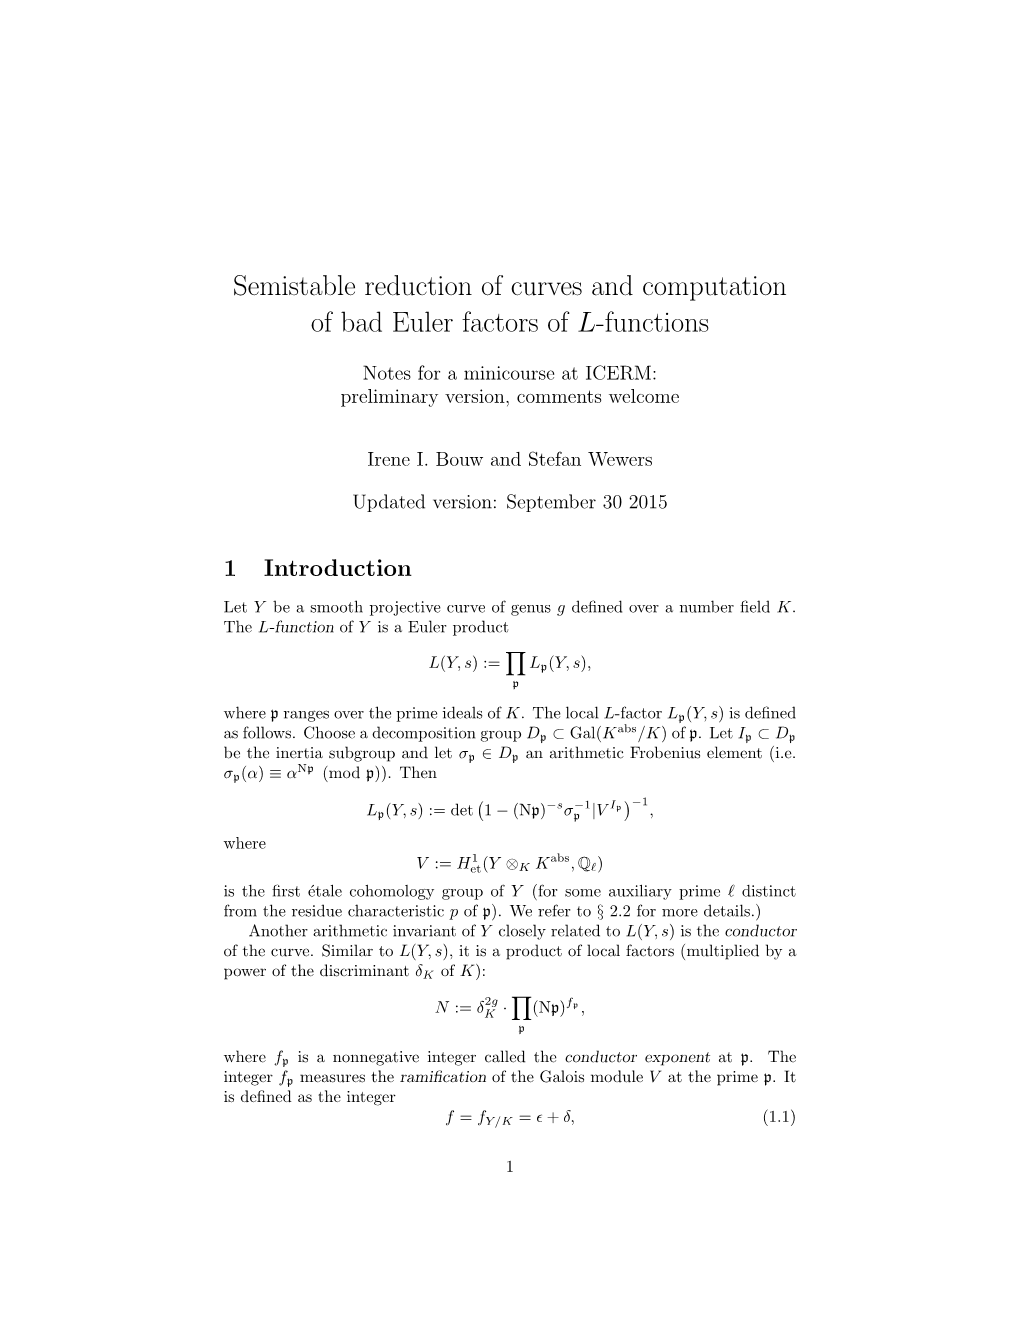 Semistable Reduction of Curves and Computation of Bad Euler Factors of L-Functions